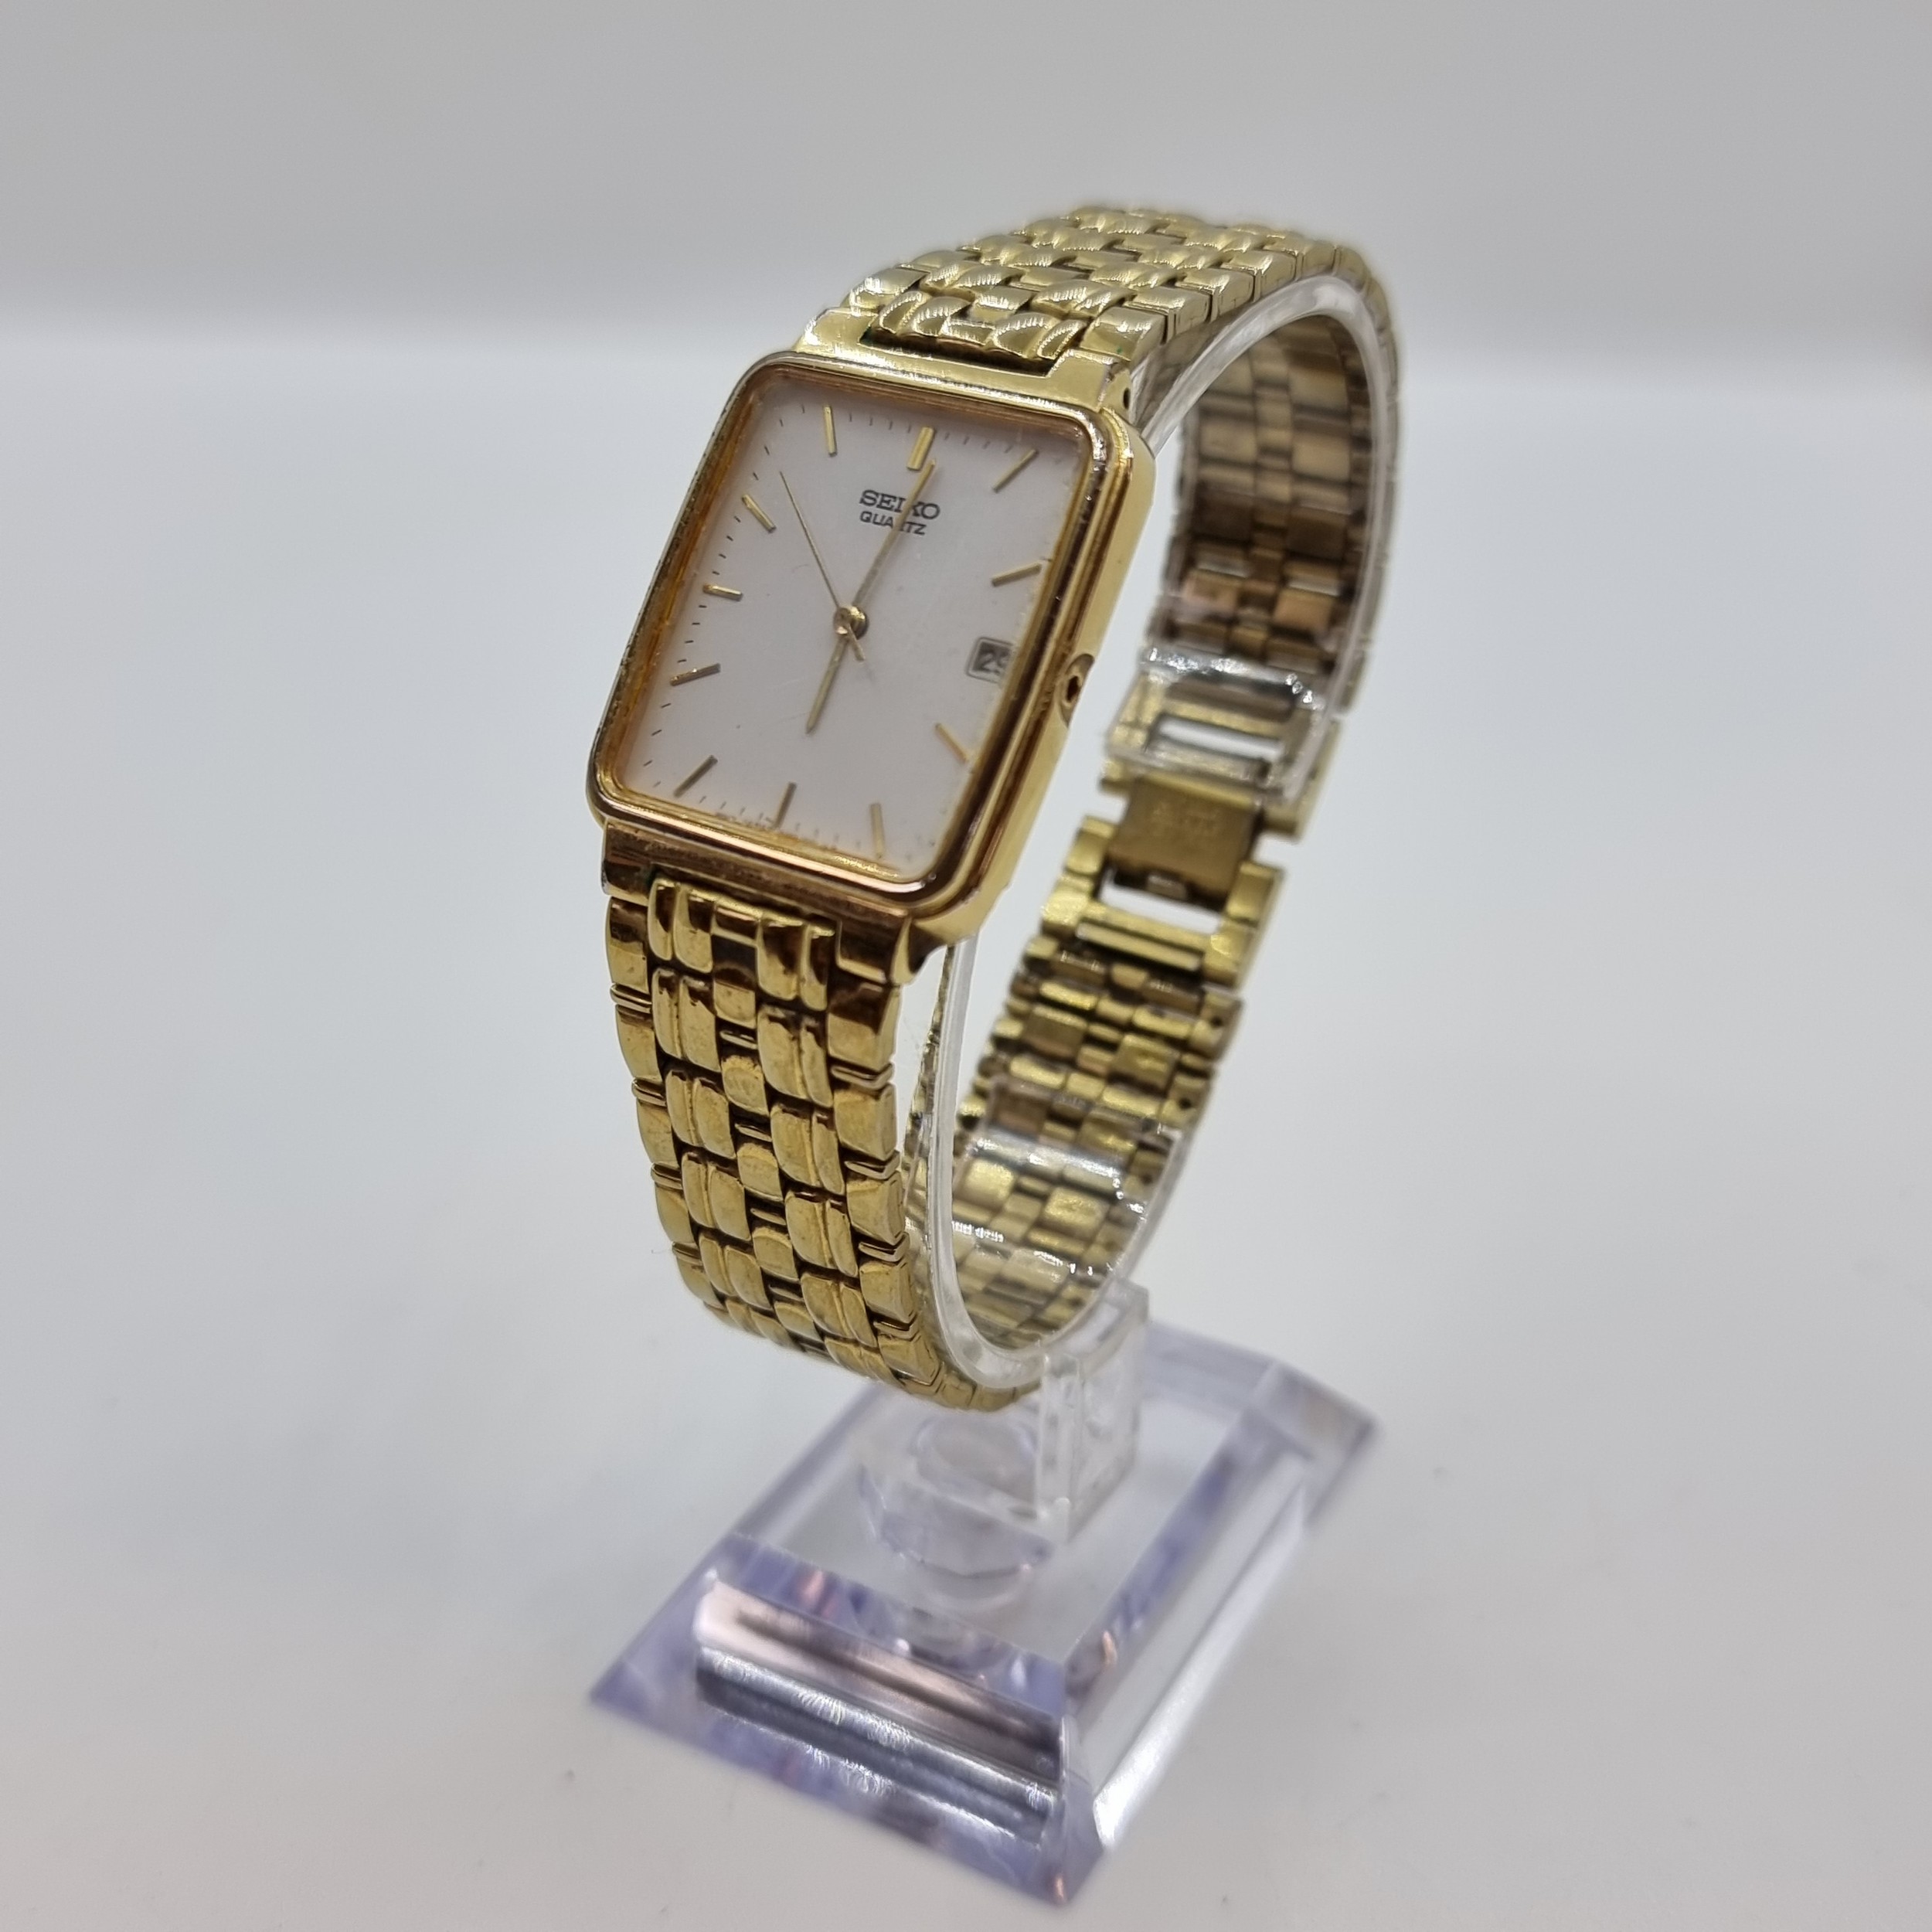 Men's Seiko gold stainless steel quartz with and white face. Model 7N22-5091 RO.